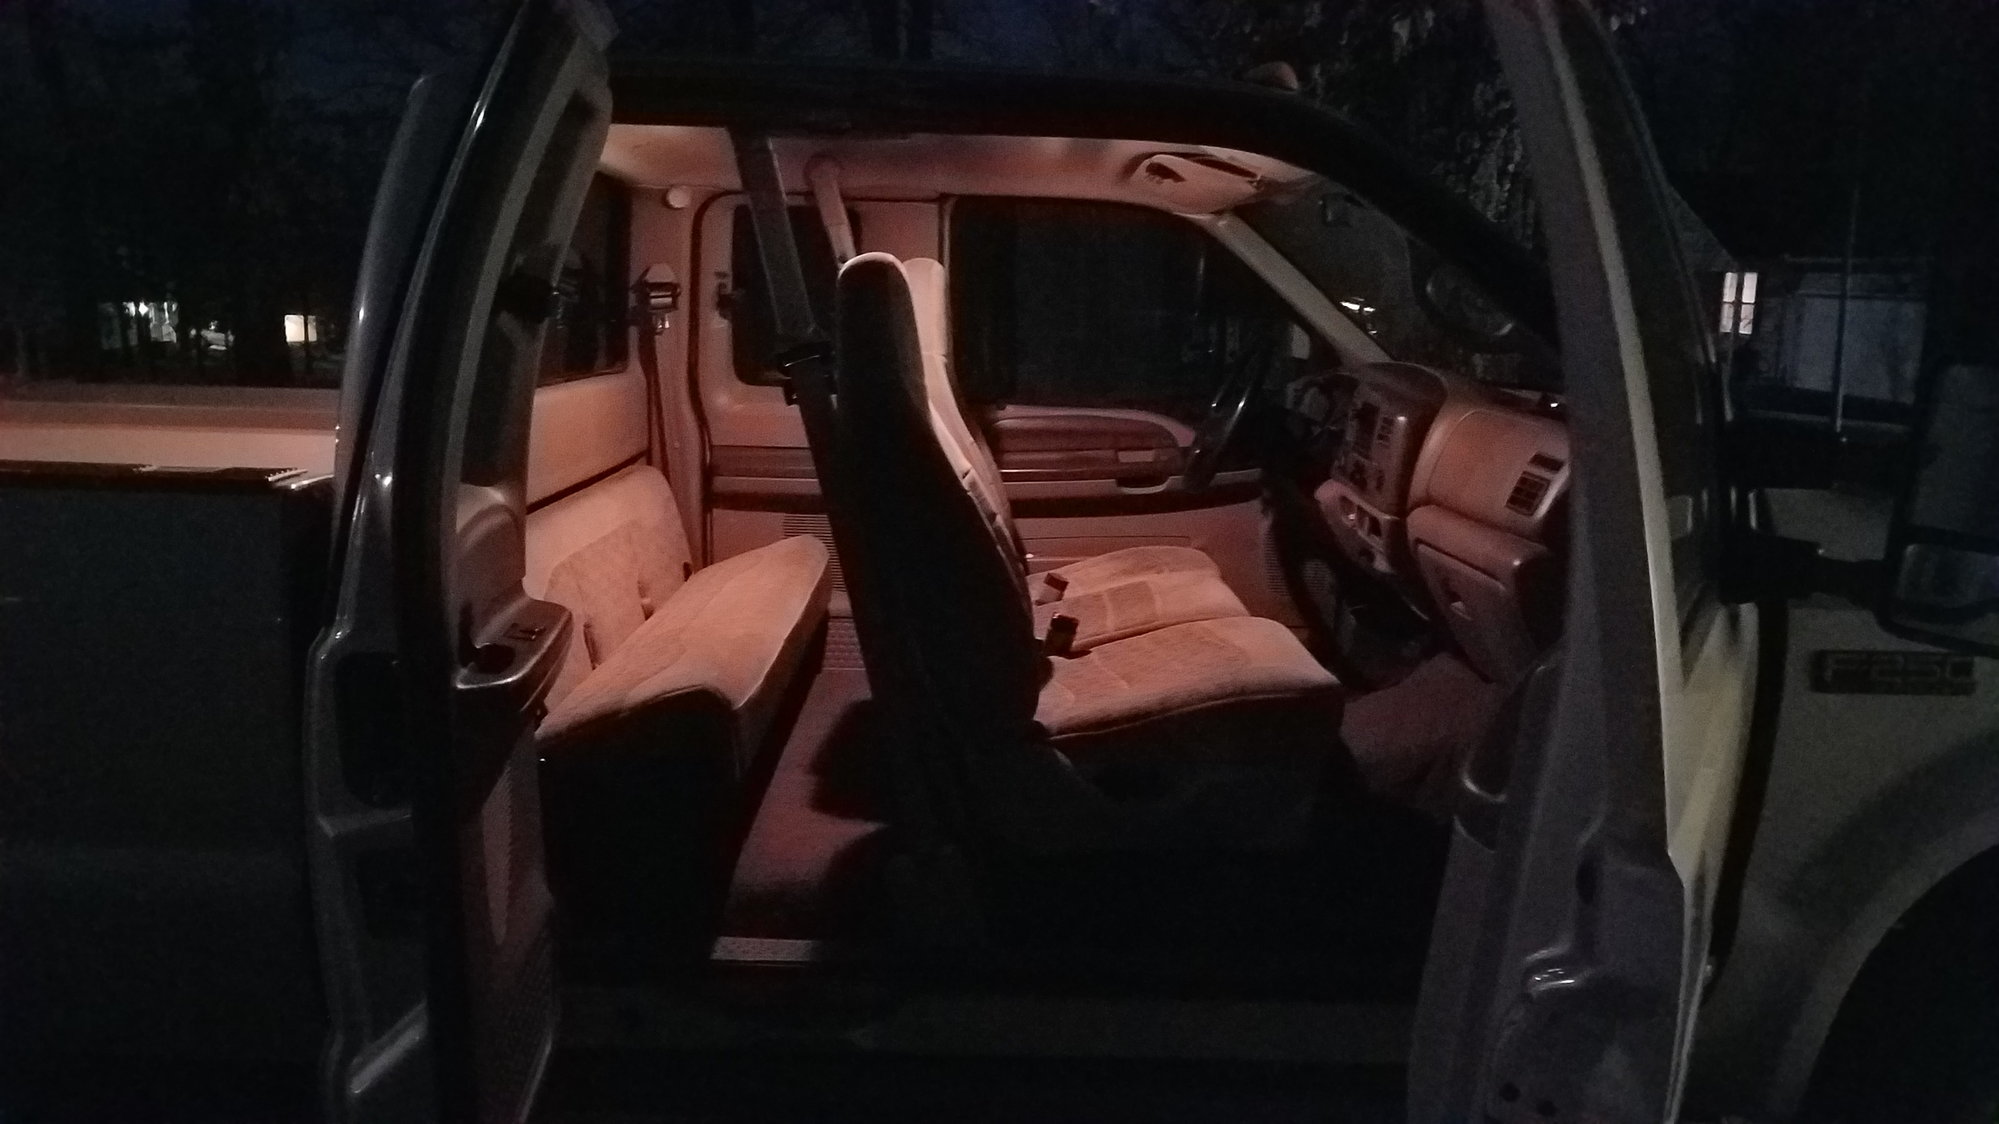 Interior lights not working on 2001 F-250 - Ford Truck Enthusiasts Forums 2012 Ford F250 Interior Lights Not Working